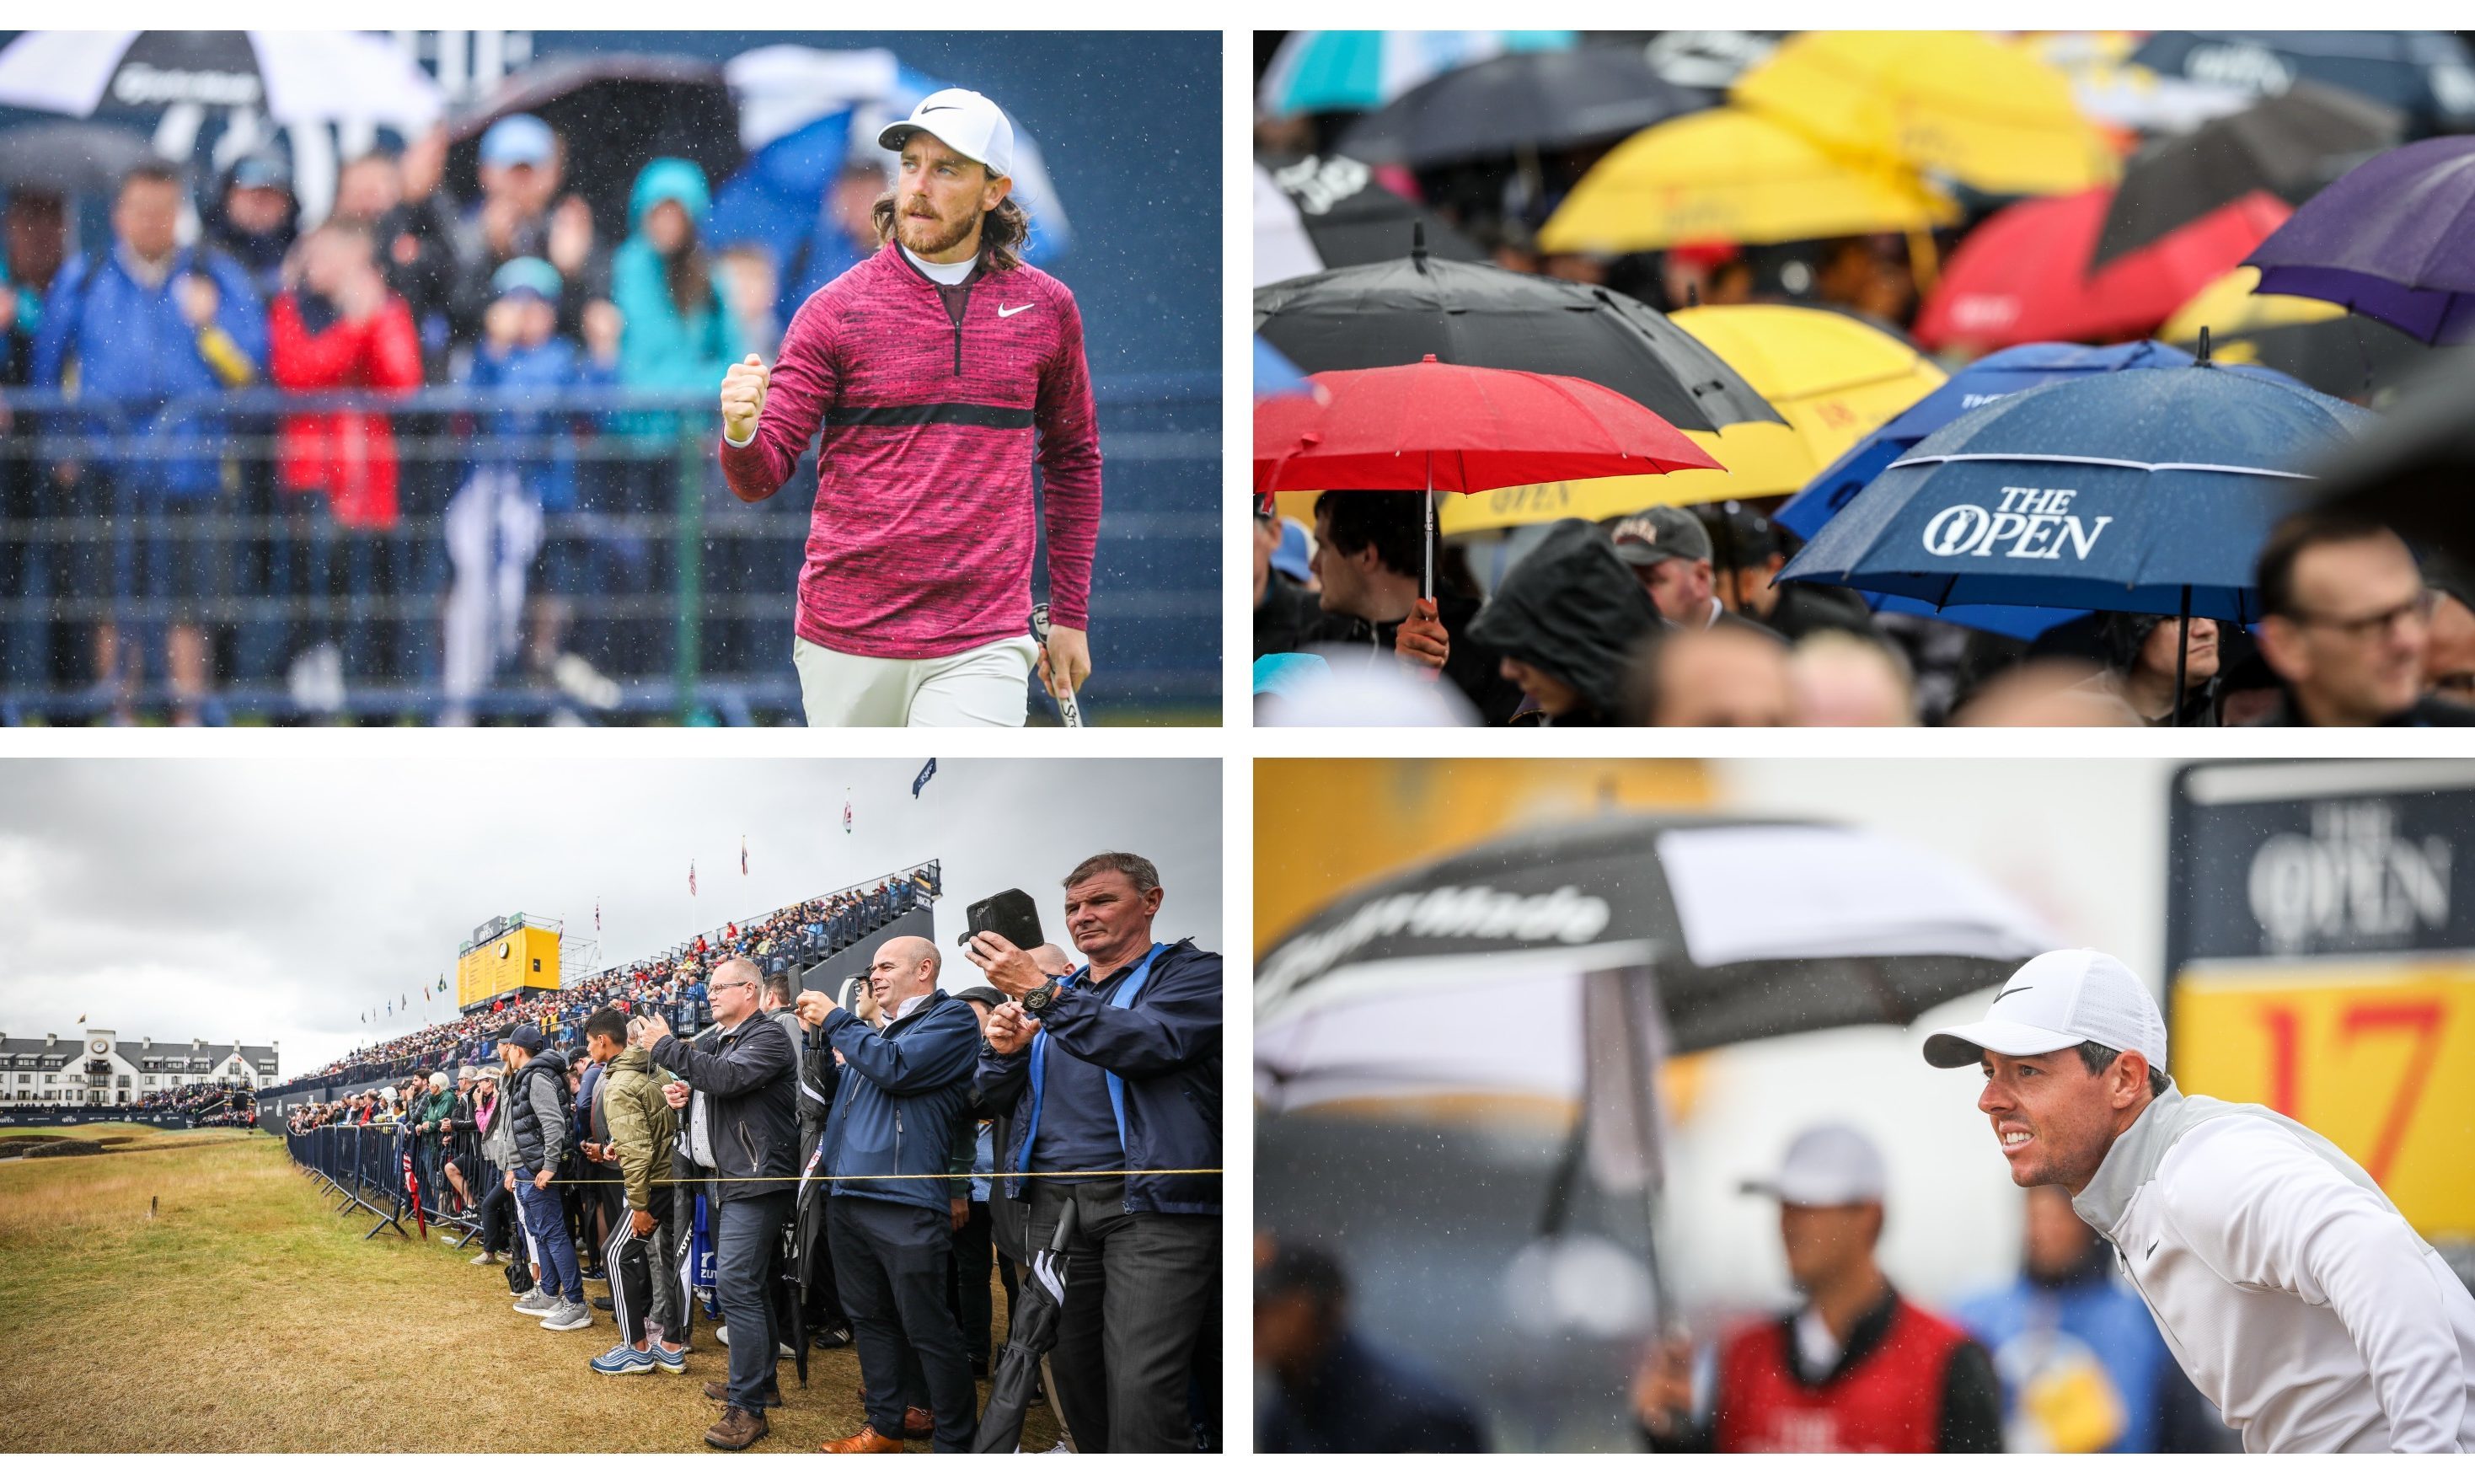 Photos from day two of the 2018 Open.